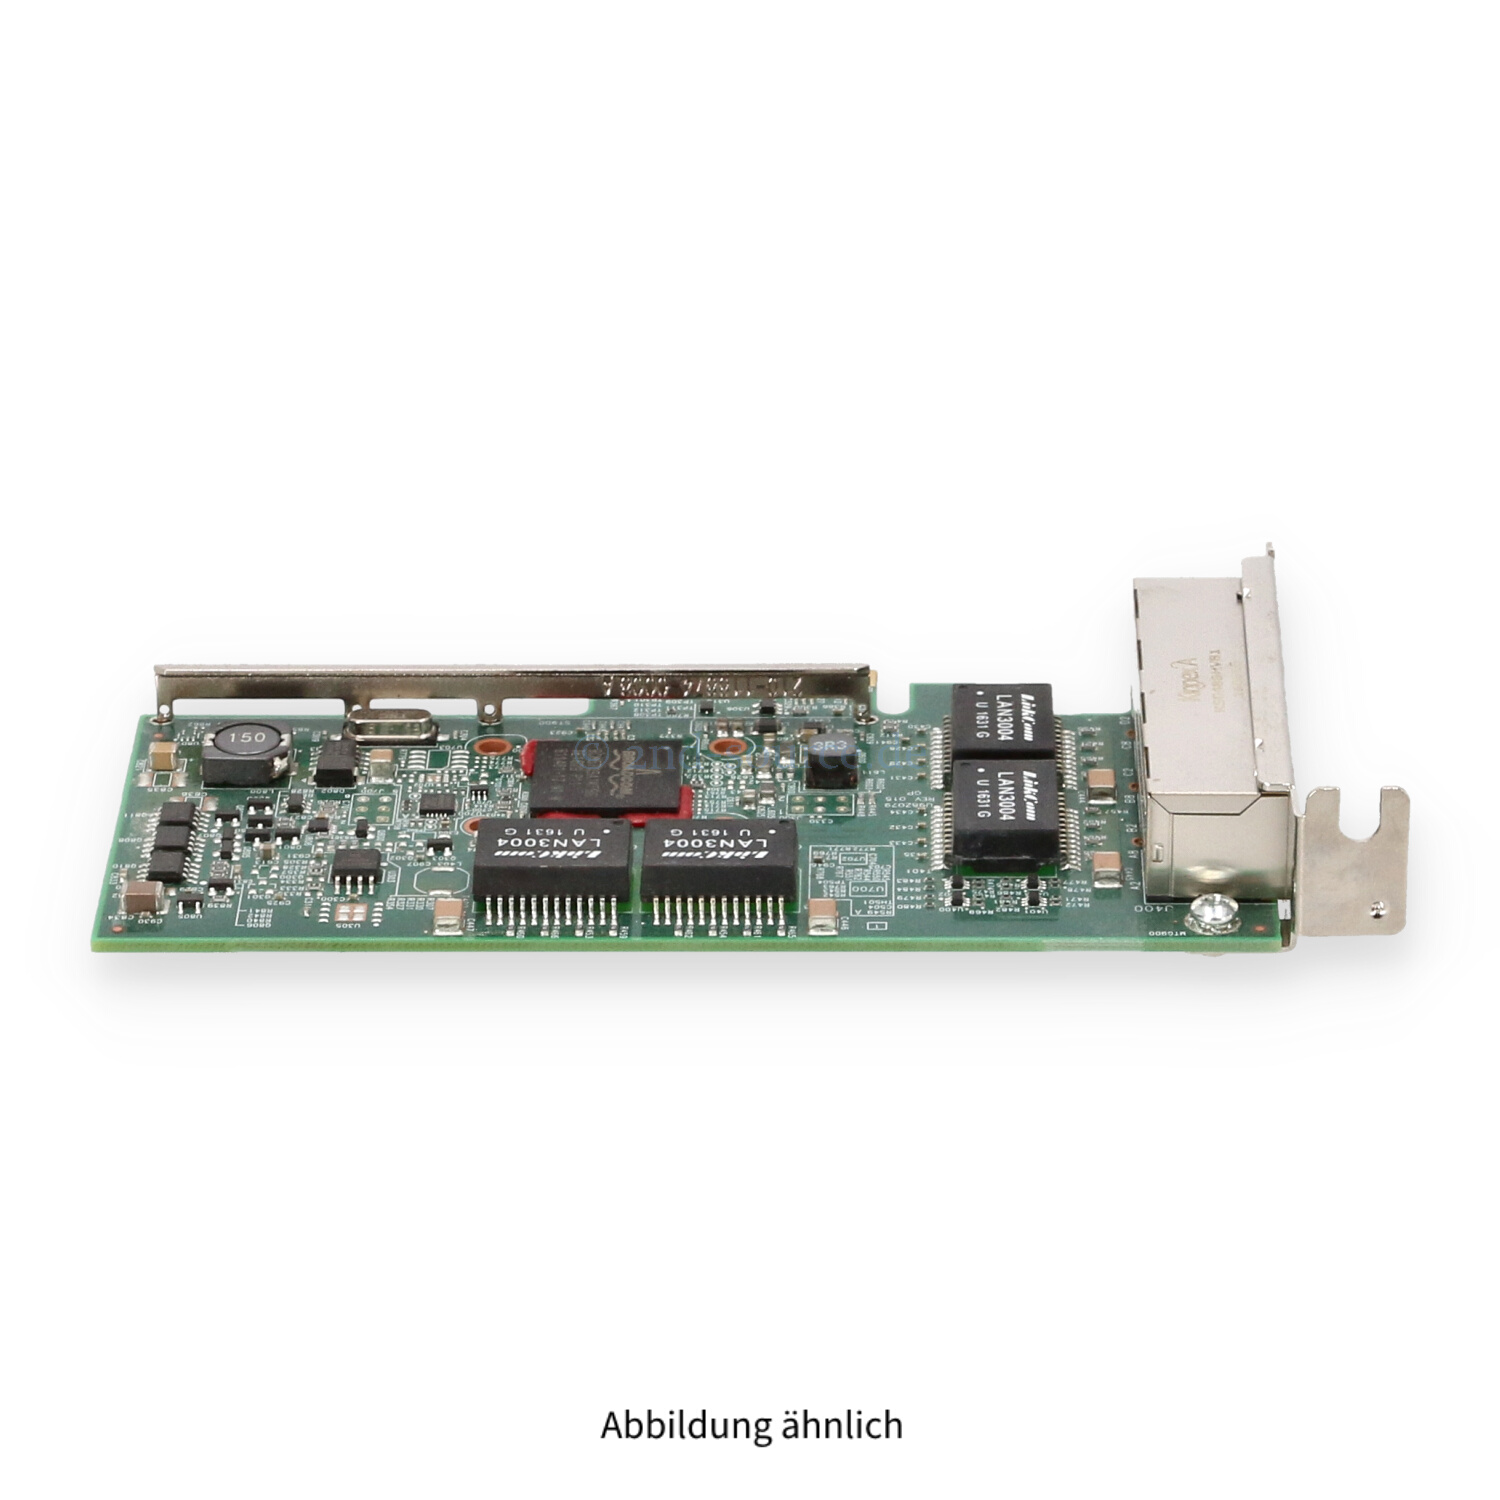 Dell Broadcom 5719 4x 1000Base-T PCIe Server Ethernet Adapter Low Profile YGCV4 0YGCV4